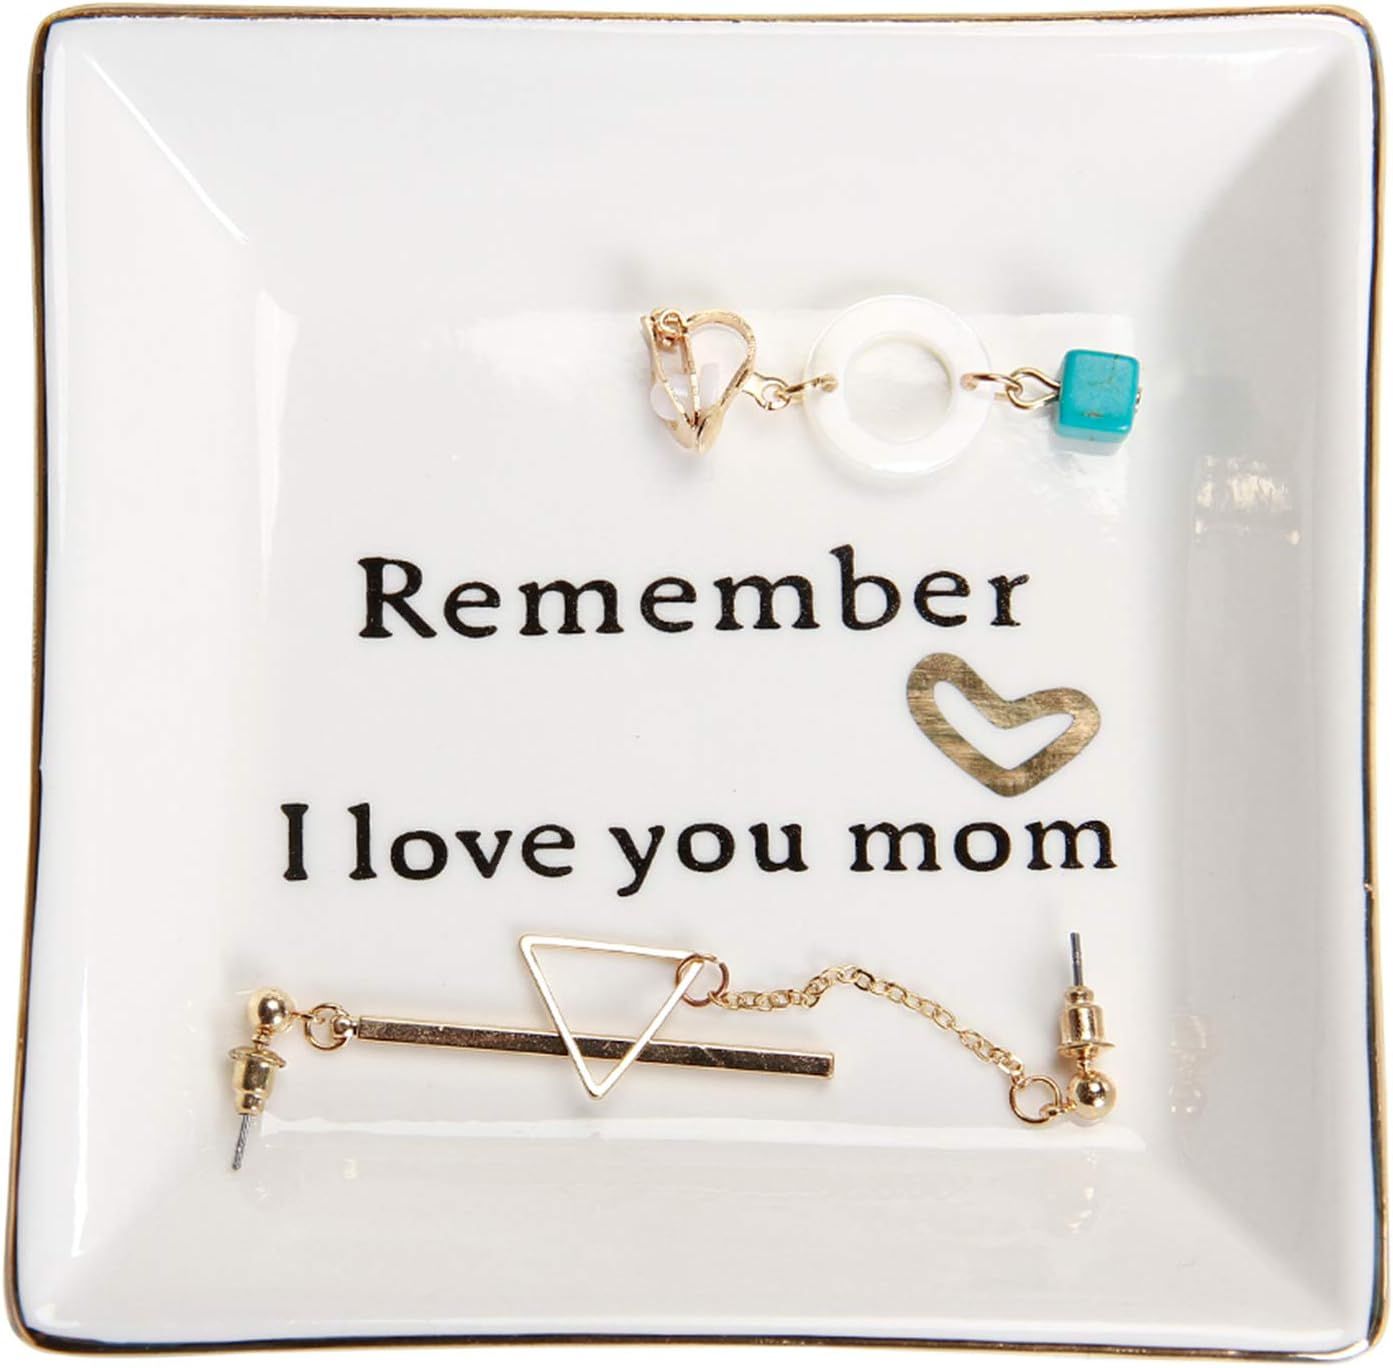 HOME SMILE Ceramic Ring Dish Decorative Trinket Plate -Remember I Love You Mom-Gifts for Mom | Amazon (US)